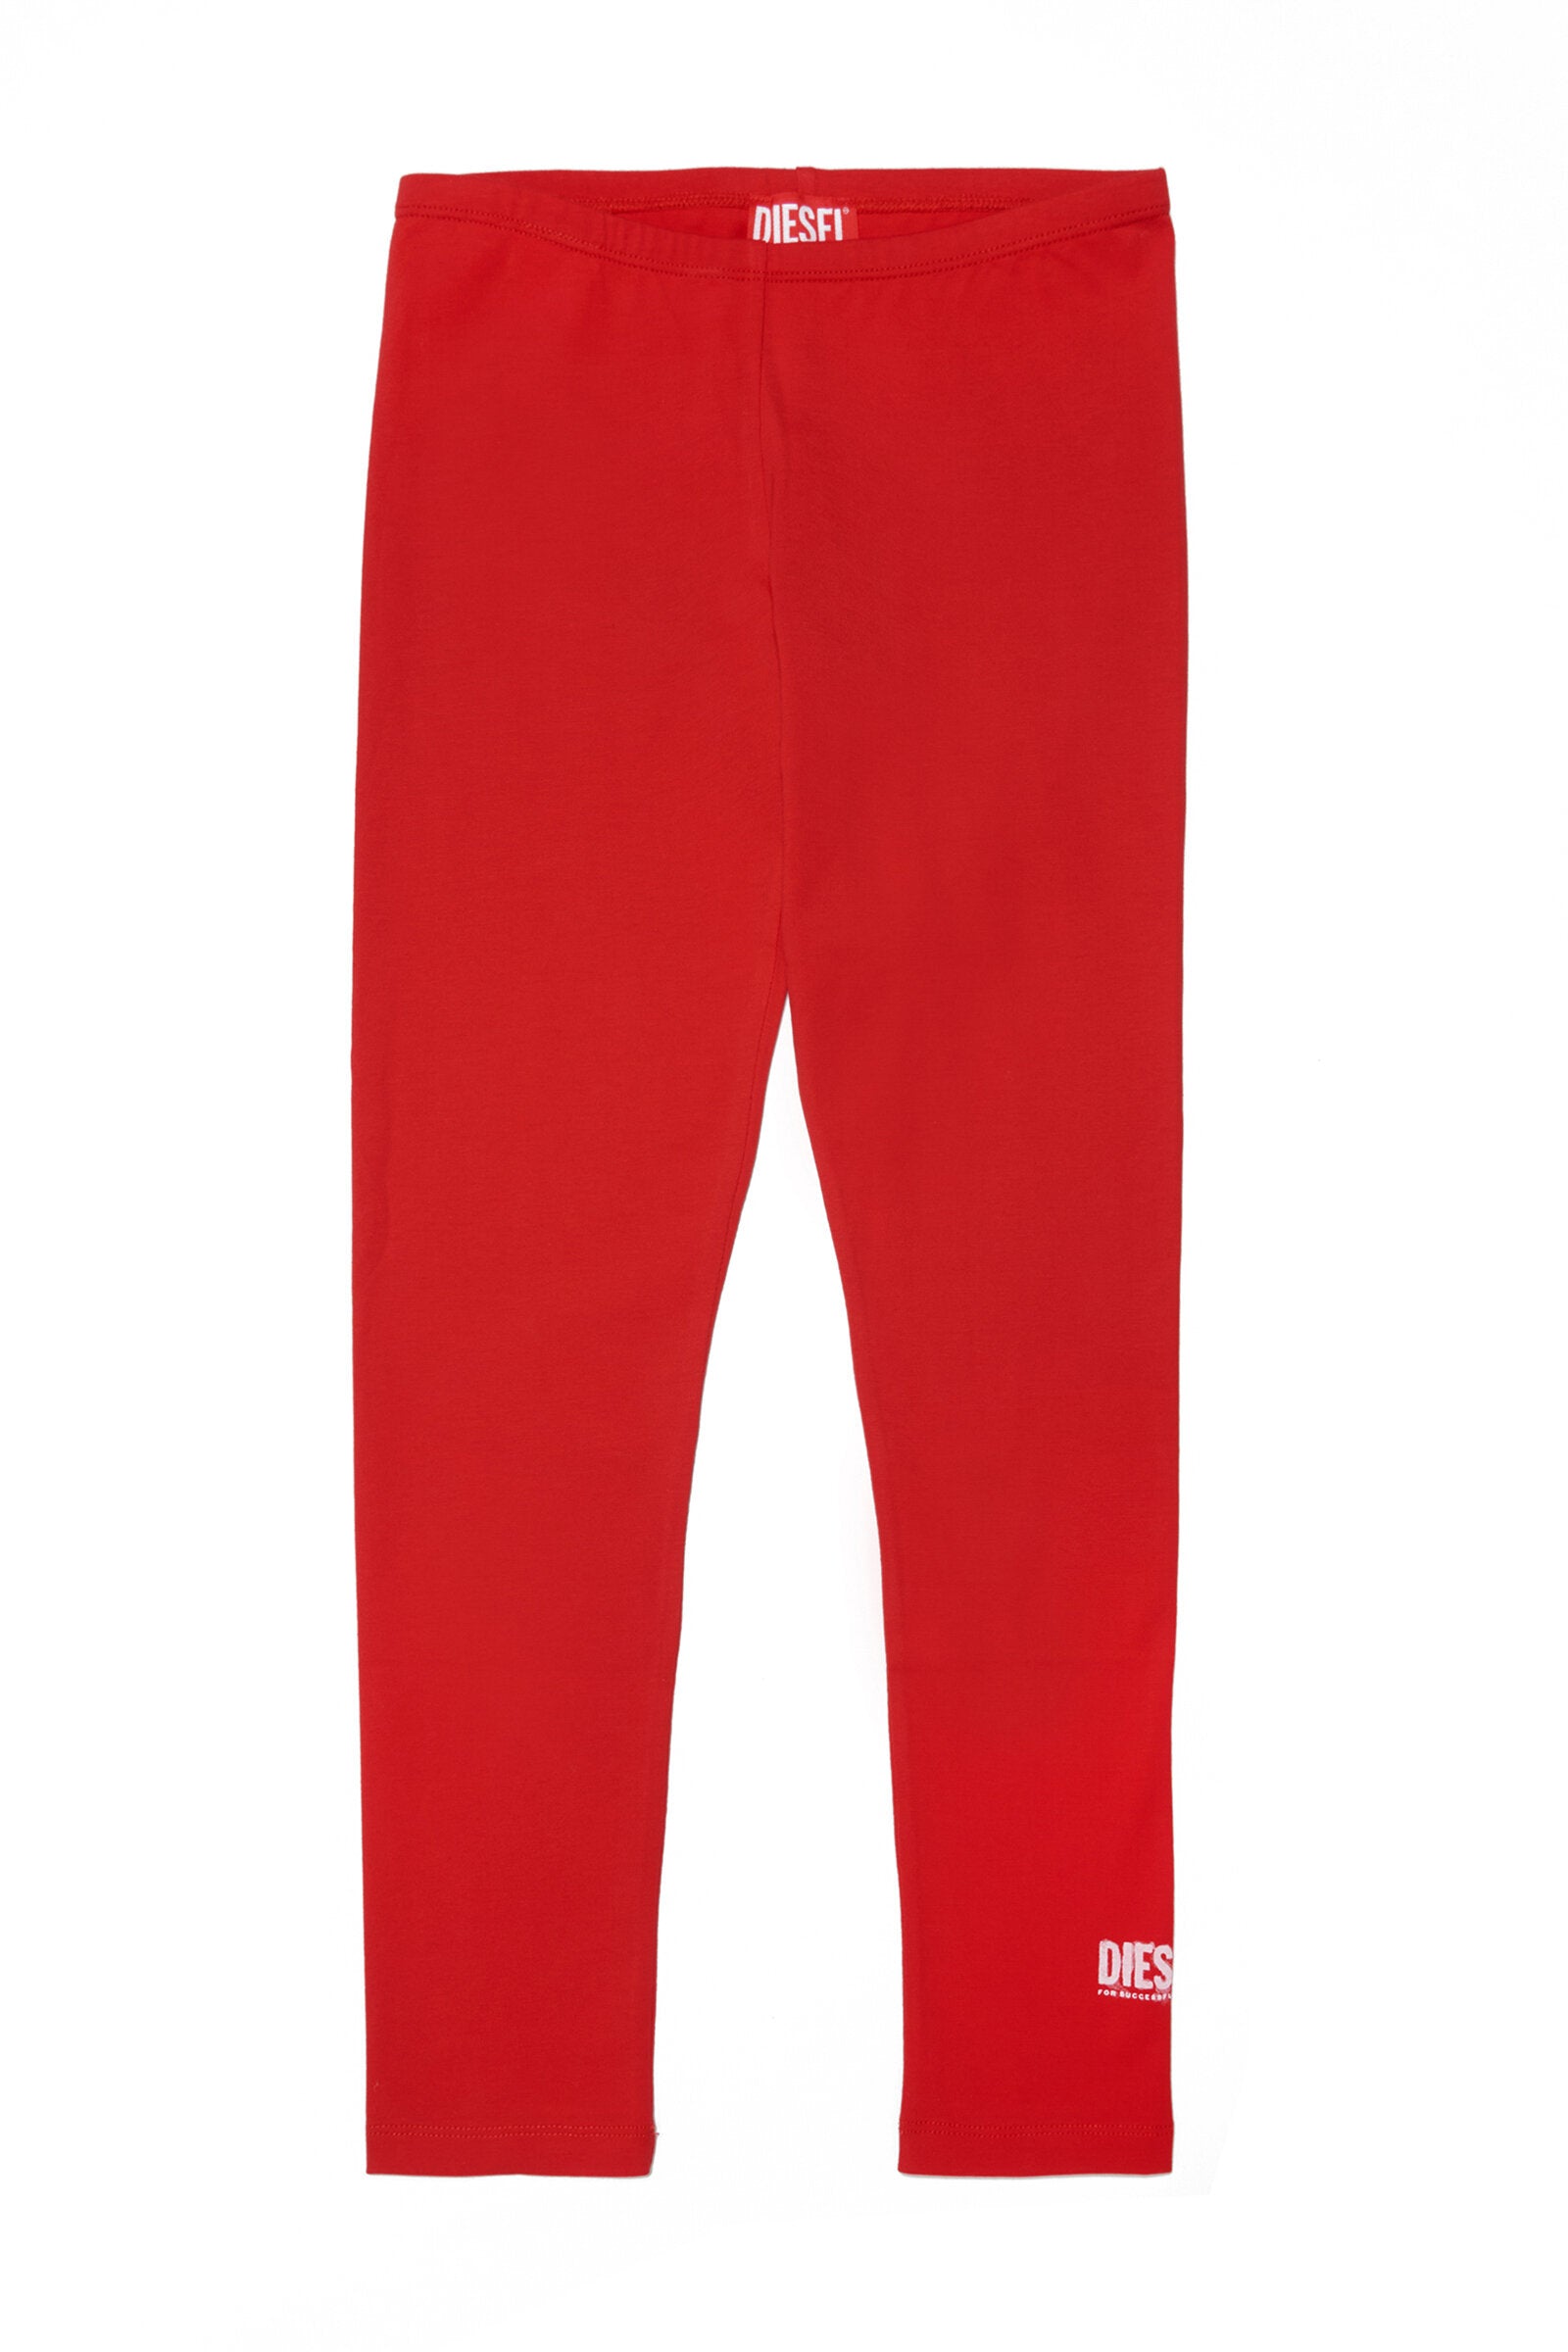 Red leggings pants with logo at ankle